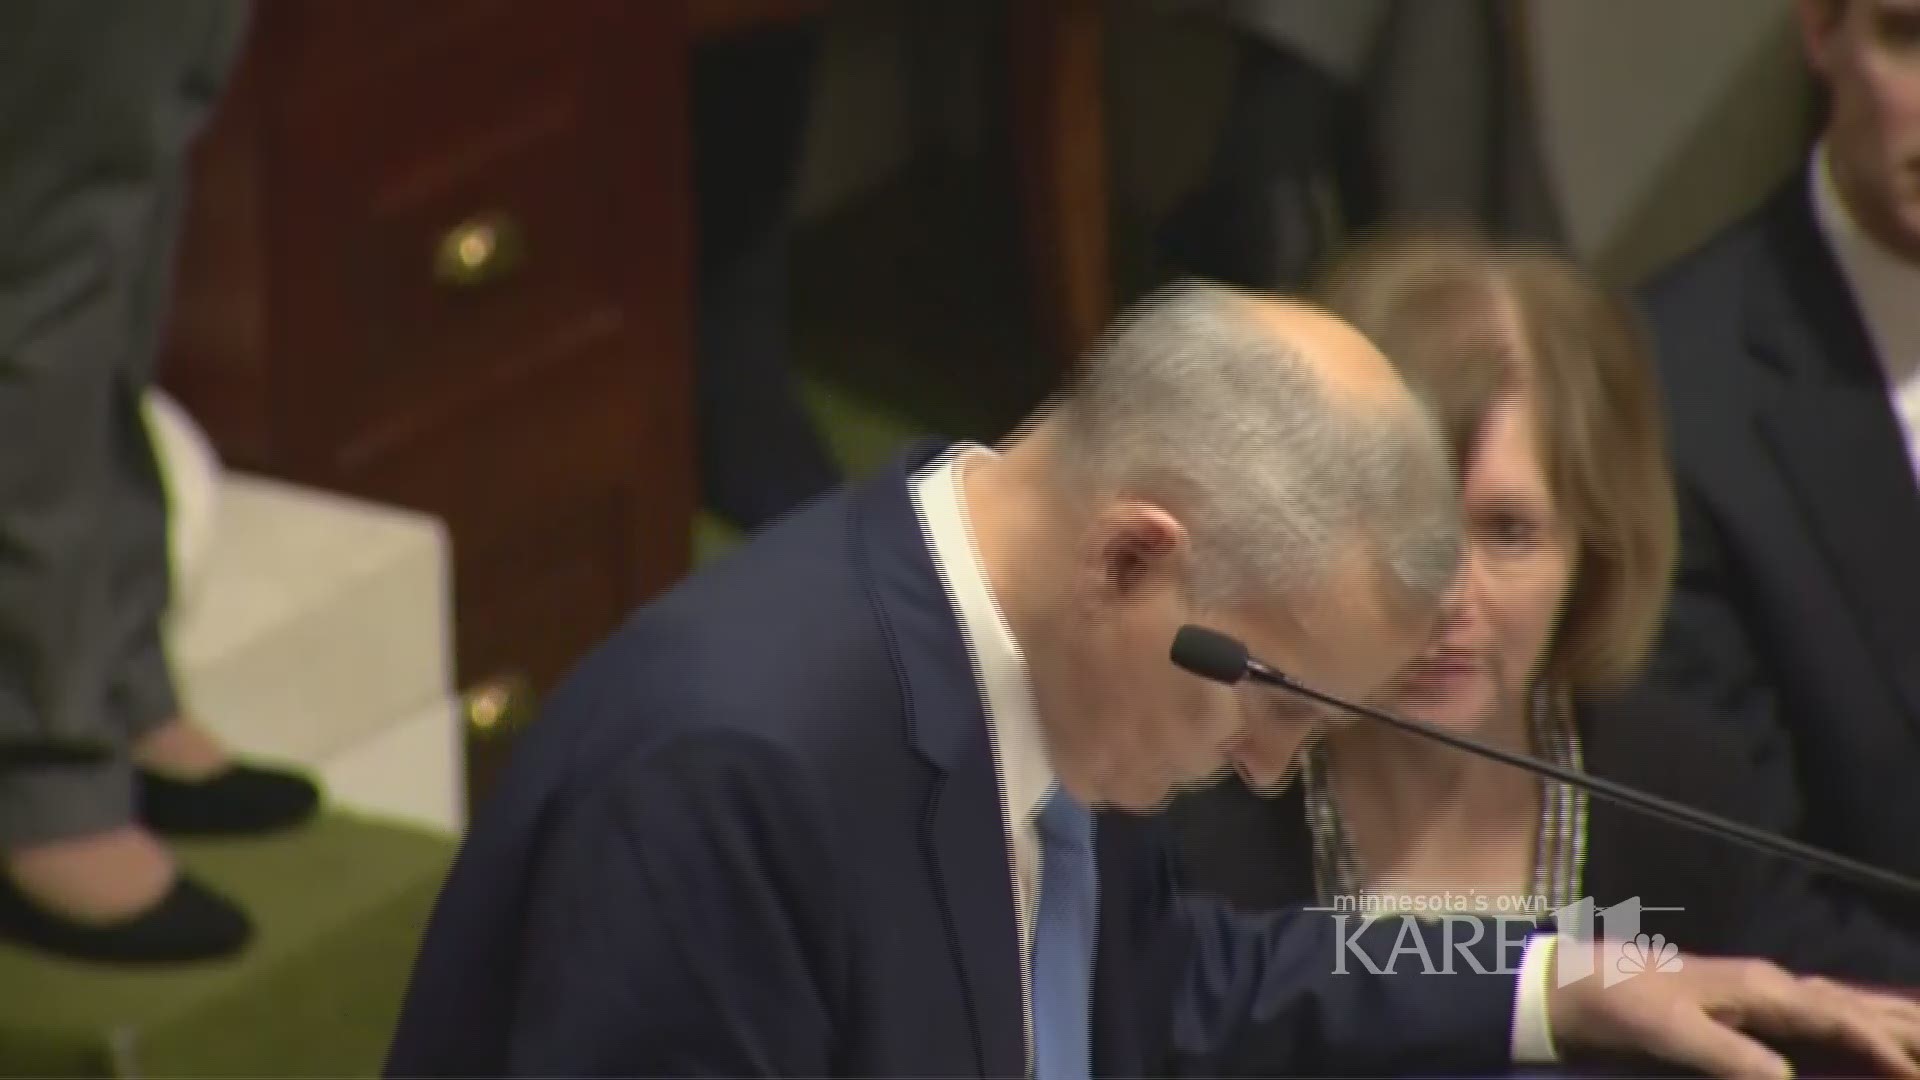 KARE 11 video of Gov. Dayton collapsing during State of the State